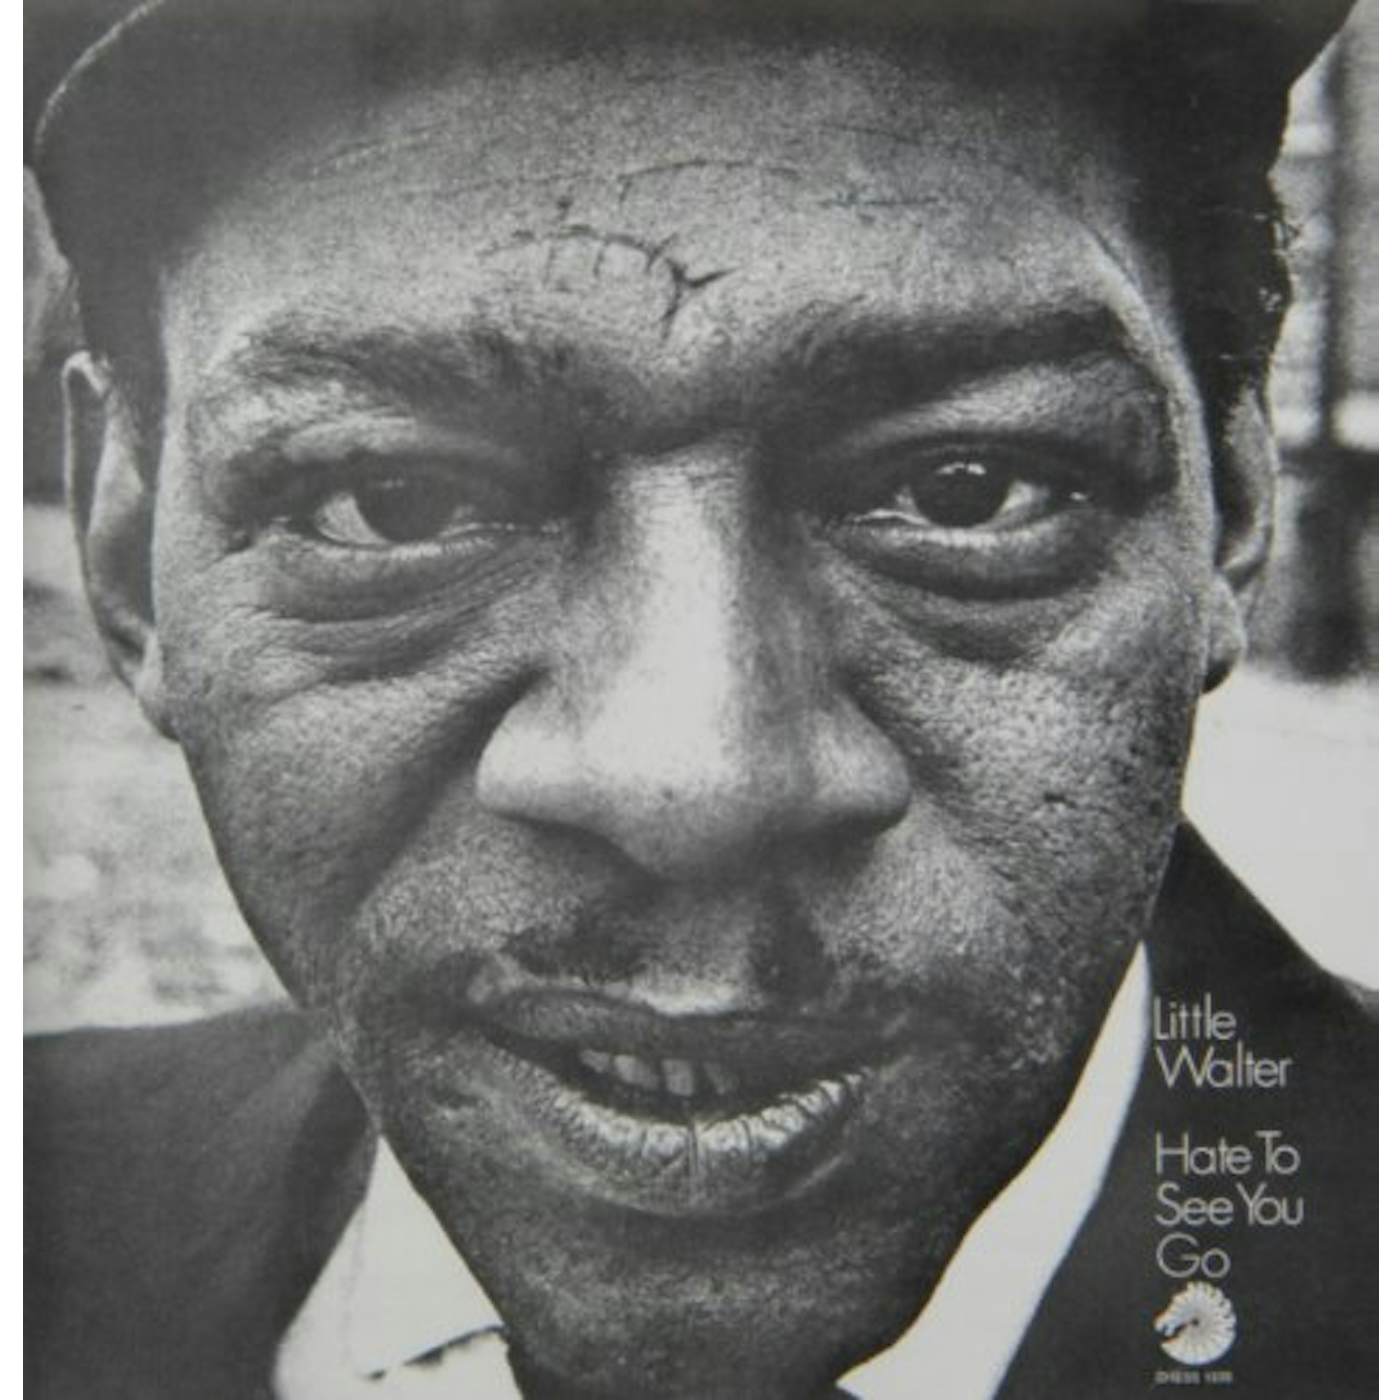 Little Walter HATE TO SEE YOU GO CD